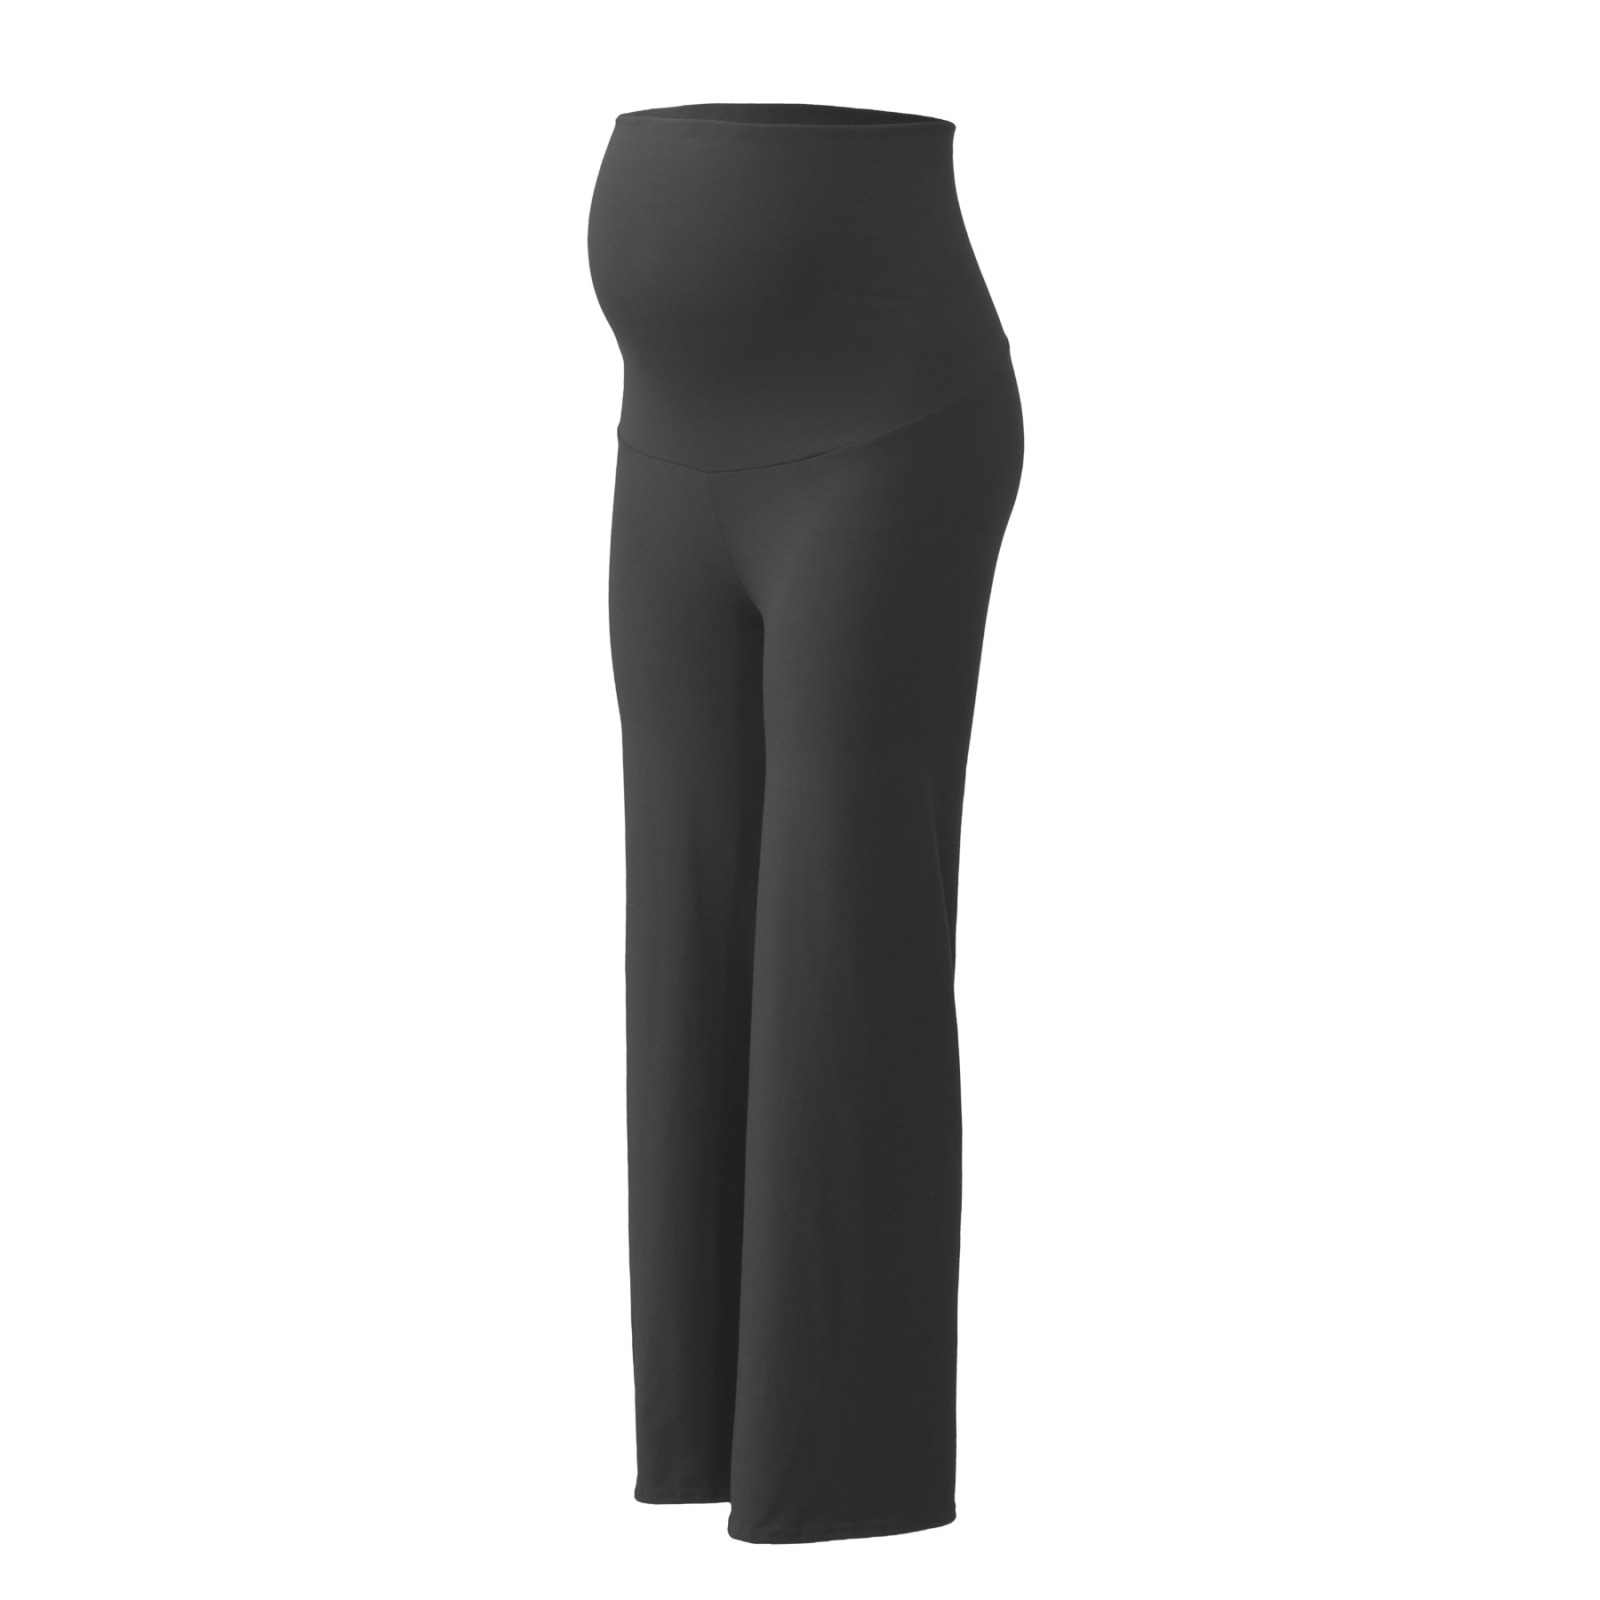 Mama Yoga pants Relaxed Fit anthracite grey